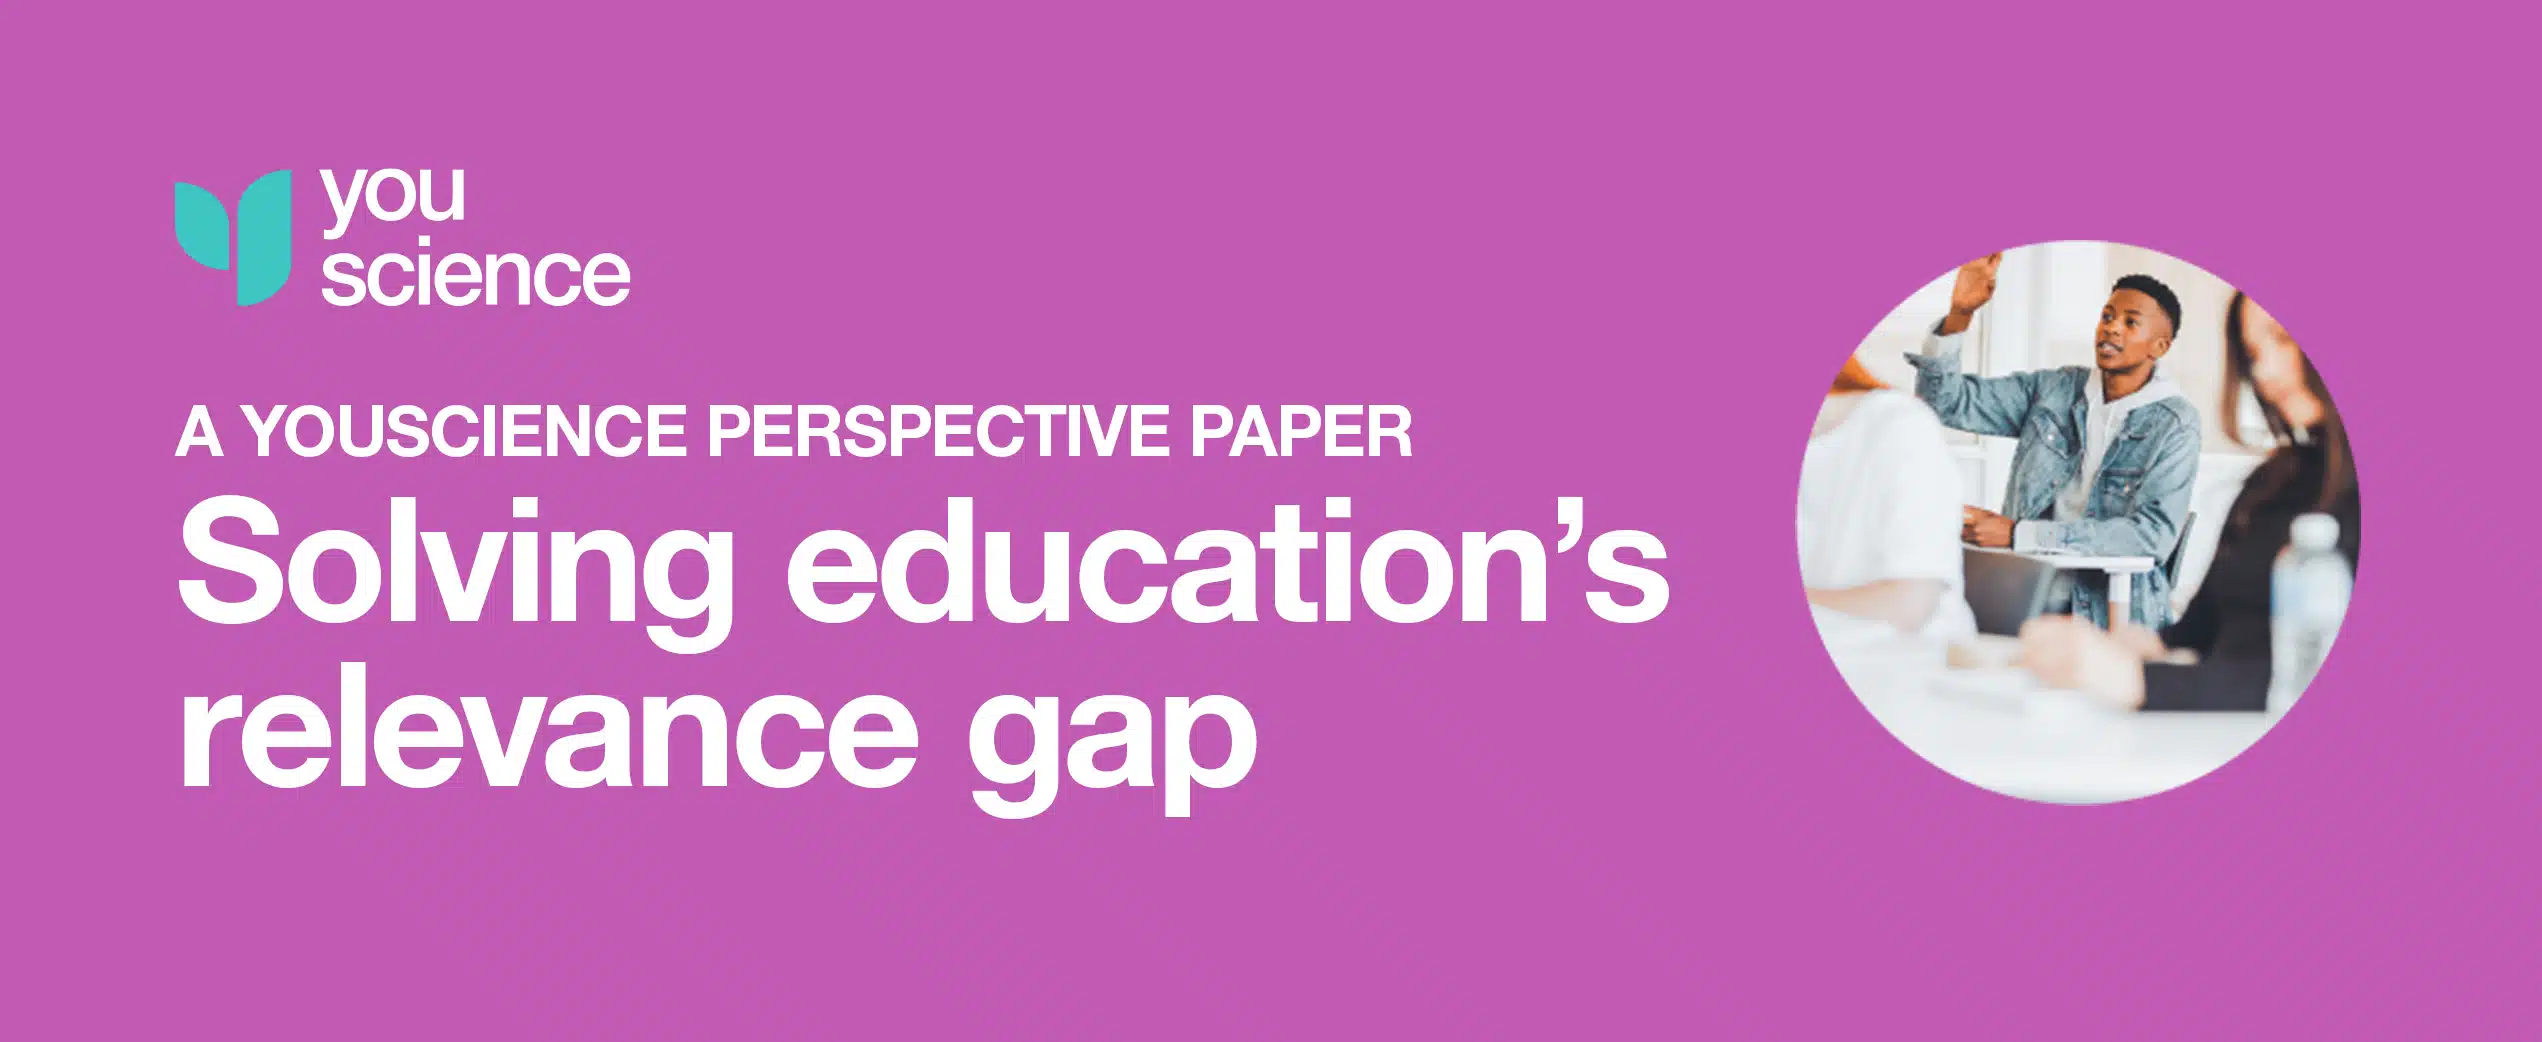 Image for A YouScience Perspective Paper: Solving education's relevance gap